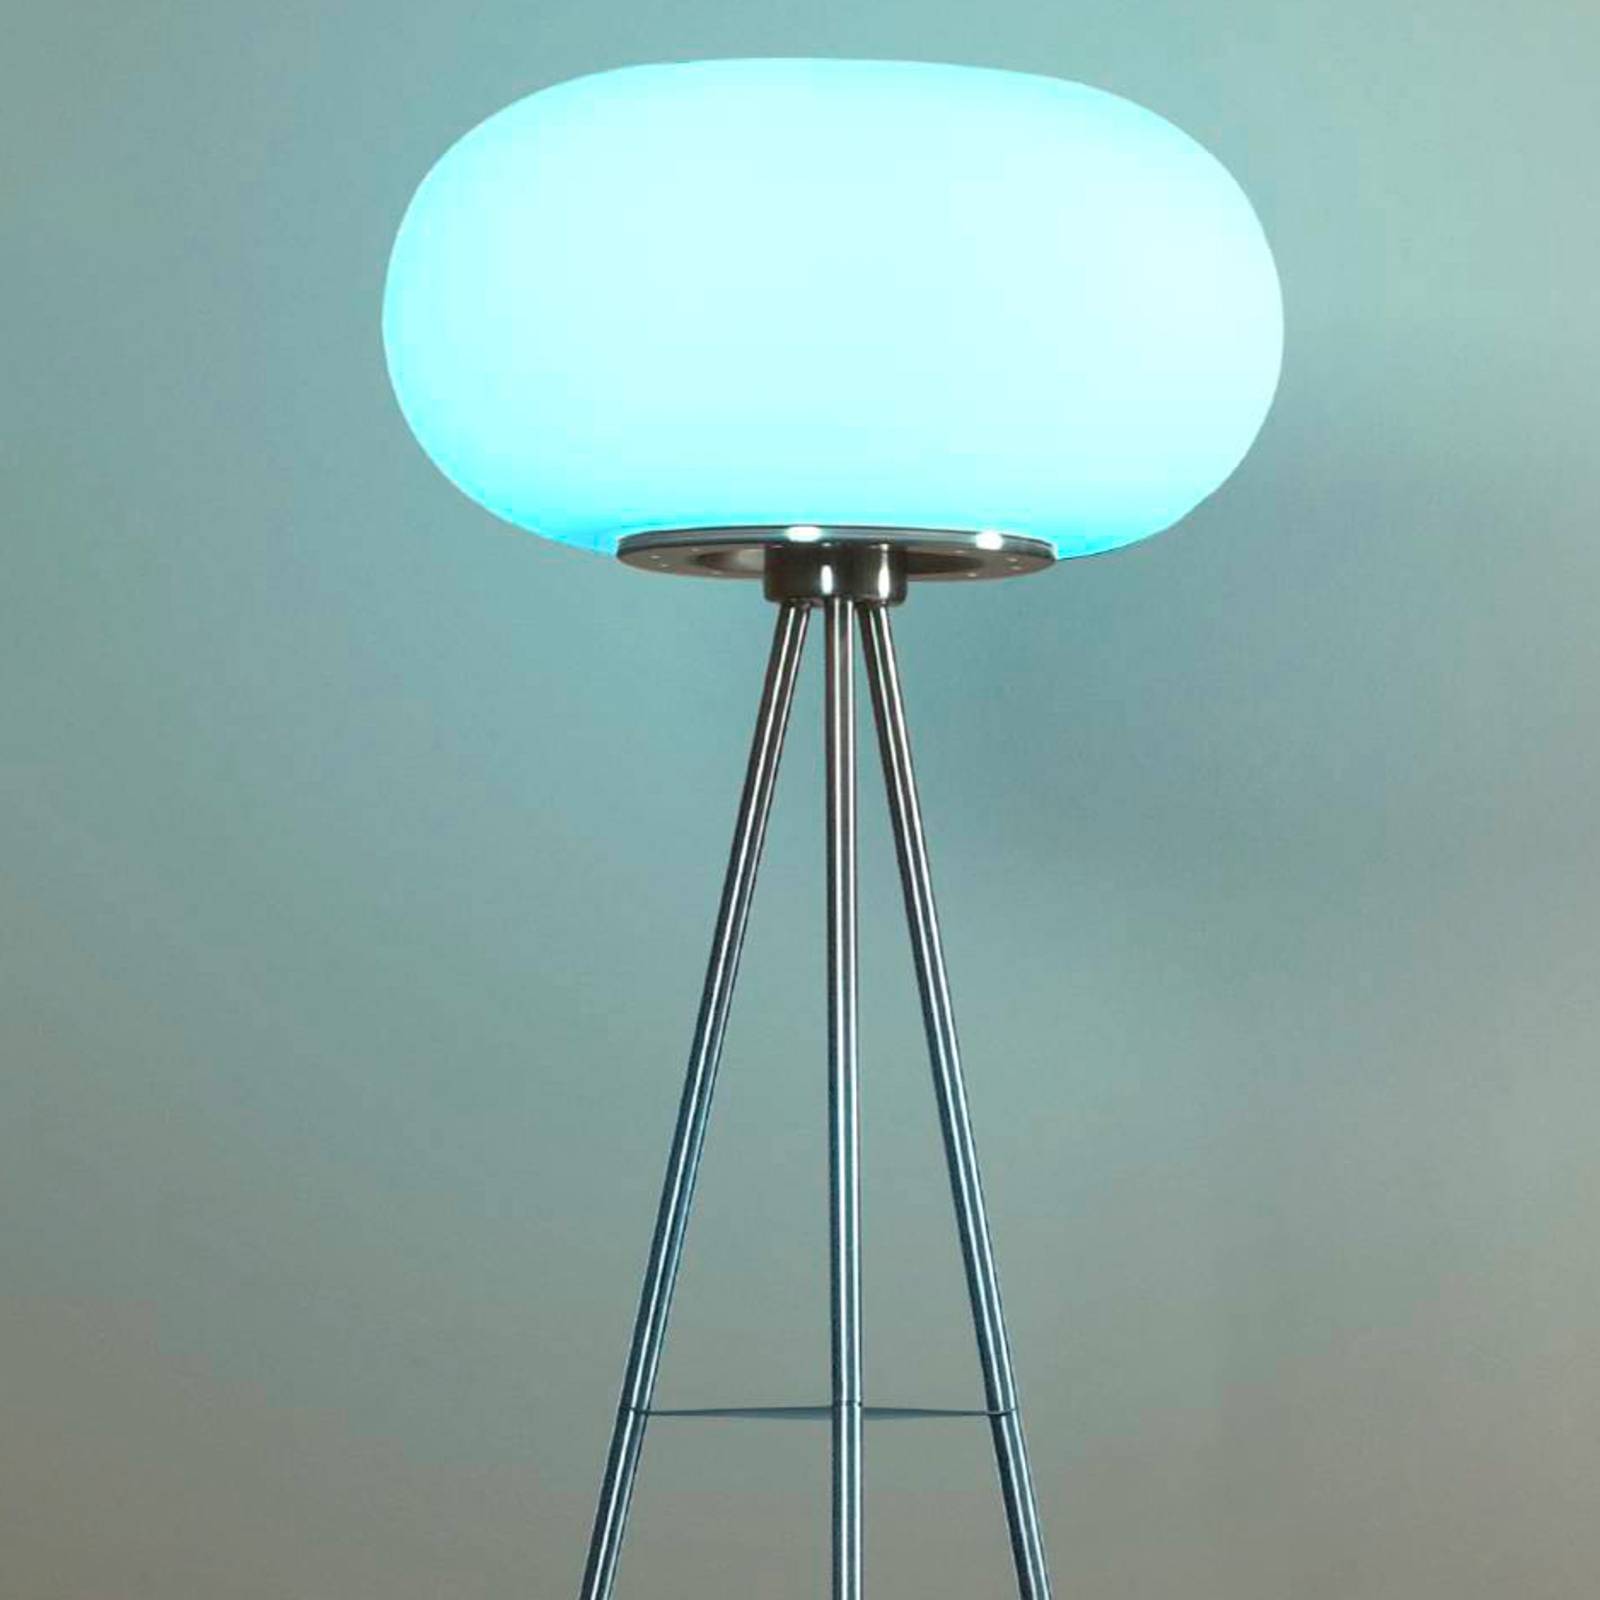 EGLO connect Optica-C LED vloerlamp, driebeen